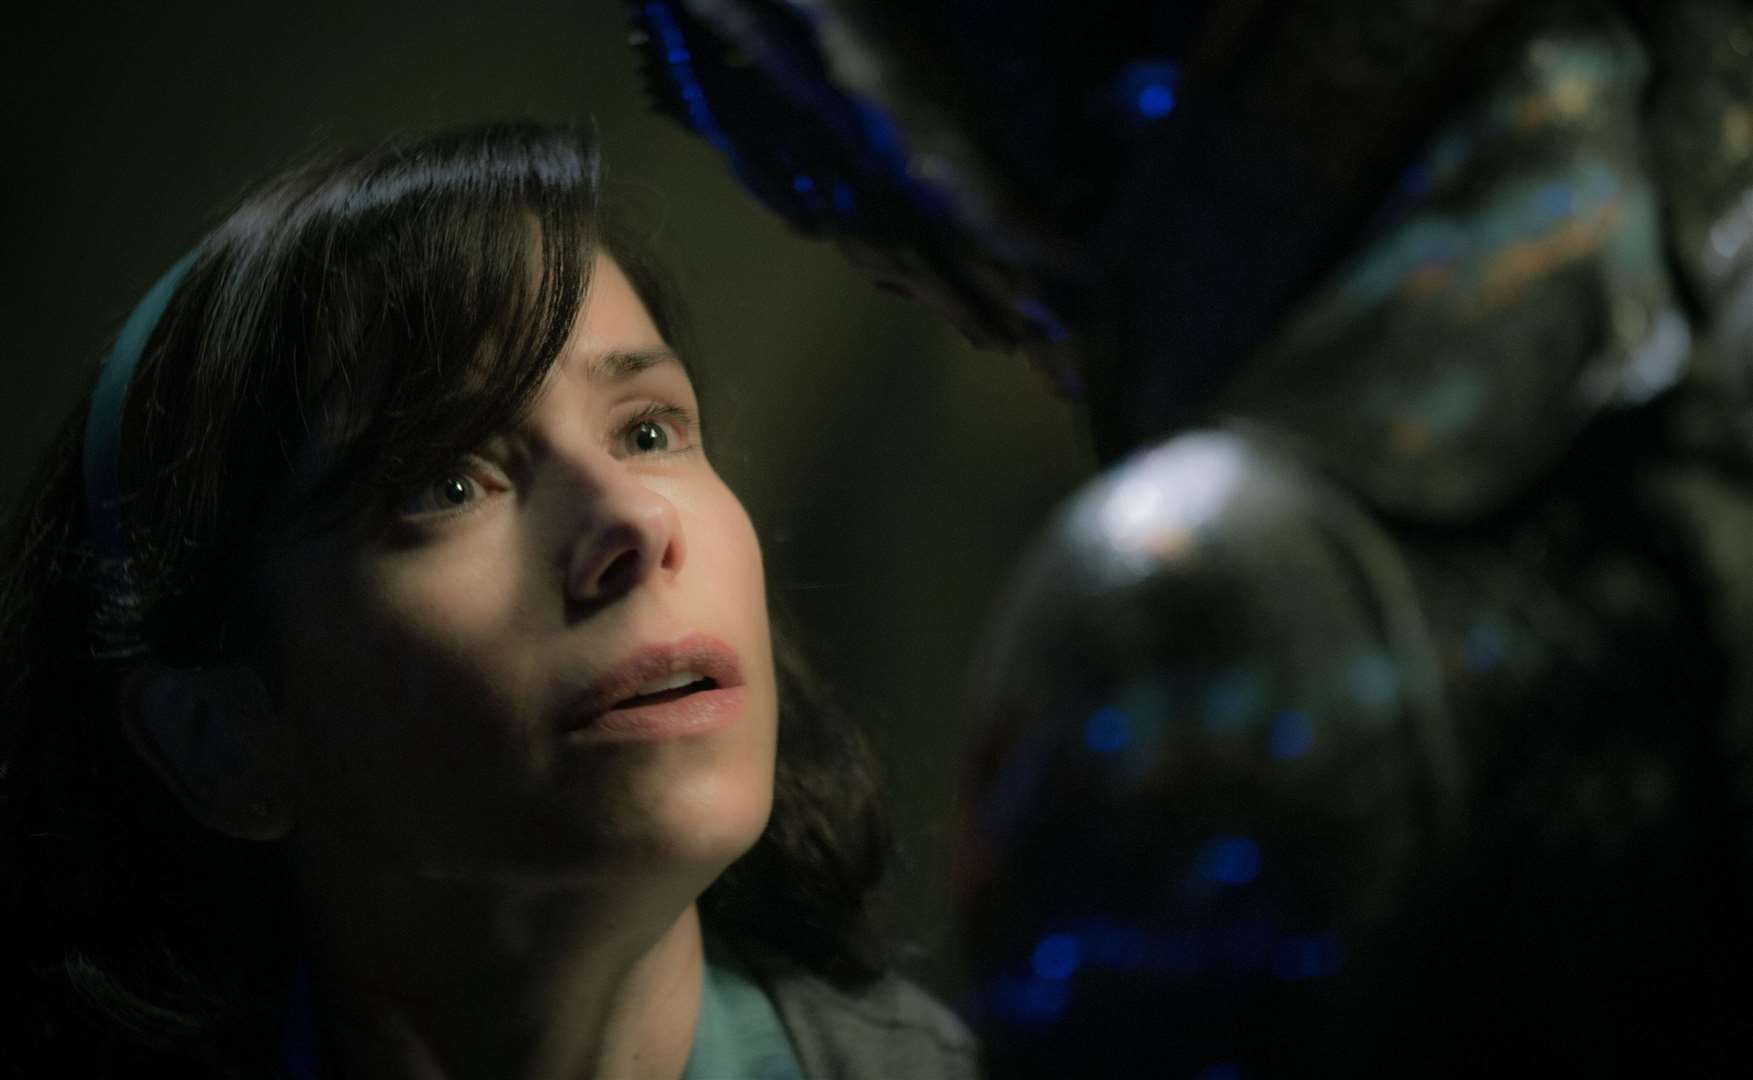 Sally Hawkins as Elisa Esposito and Doug Jones as the creature in The Shape of Water. Picture: PA Photo/Twentieth Century Fox Film Corporation/Kerry Hayes